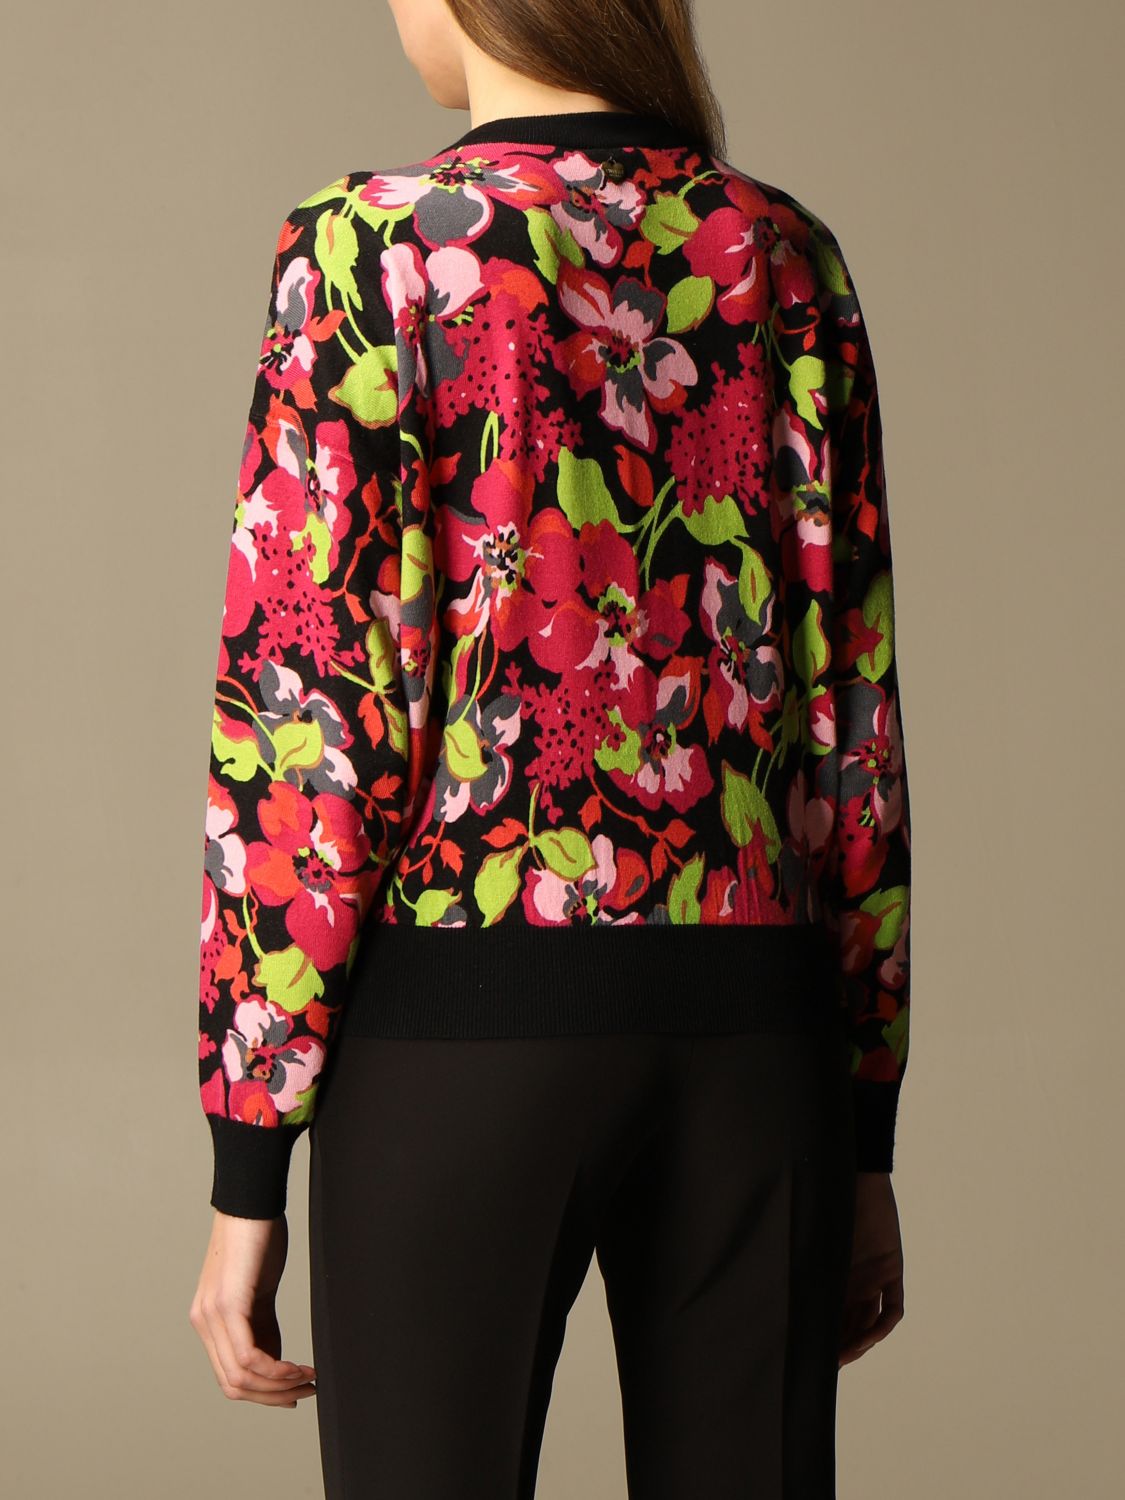 Twin-set crewneck sweater with floral pattern